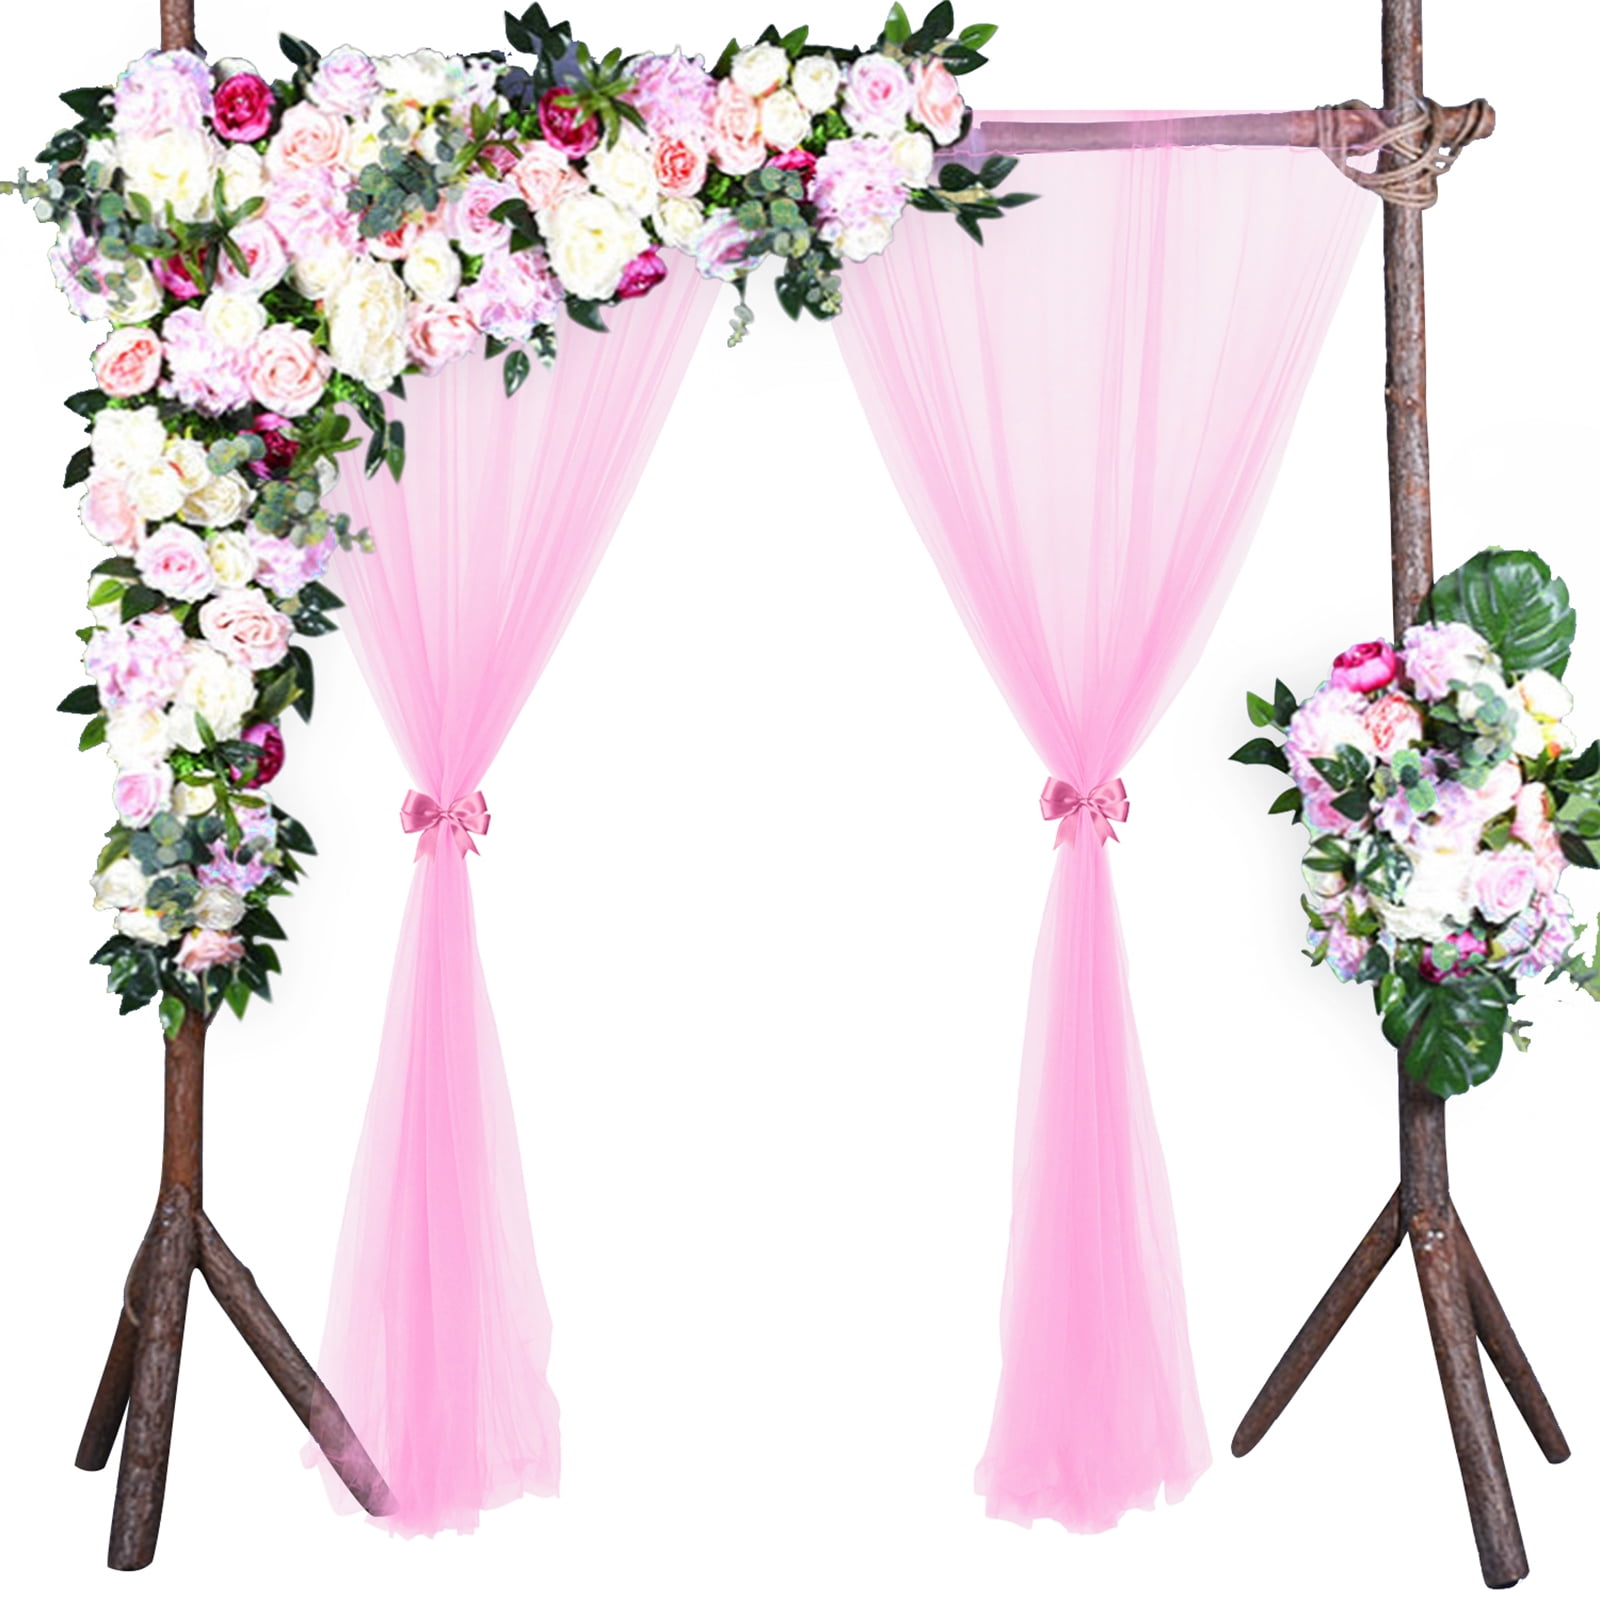 Outdoor Curtain Chiffon Backdrop Birthday Wedding Party Decoration Wedding Photo Shooting Background Stage Hotel Layout Supplies